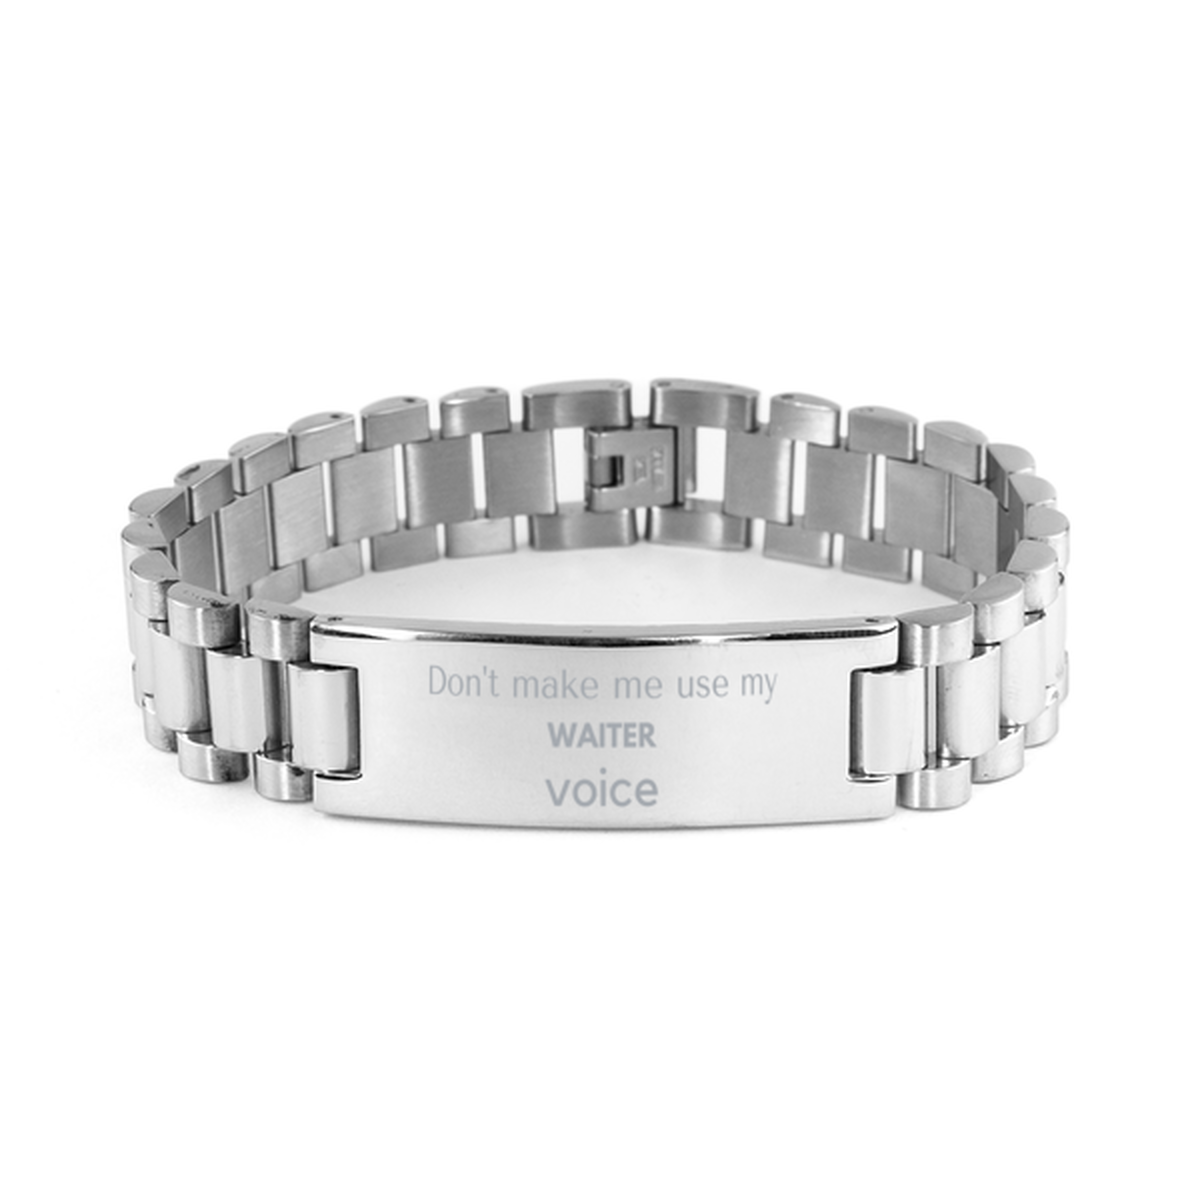 Don't make me use my Waiter voice, Sarcasm Waiter Gifts, Christmas Waiter Ladder Stainless Steel Bracelet Birthday Unique Gifts For Waiter Coworkers, Men, Women, Colleague, Friends